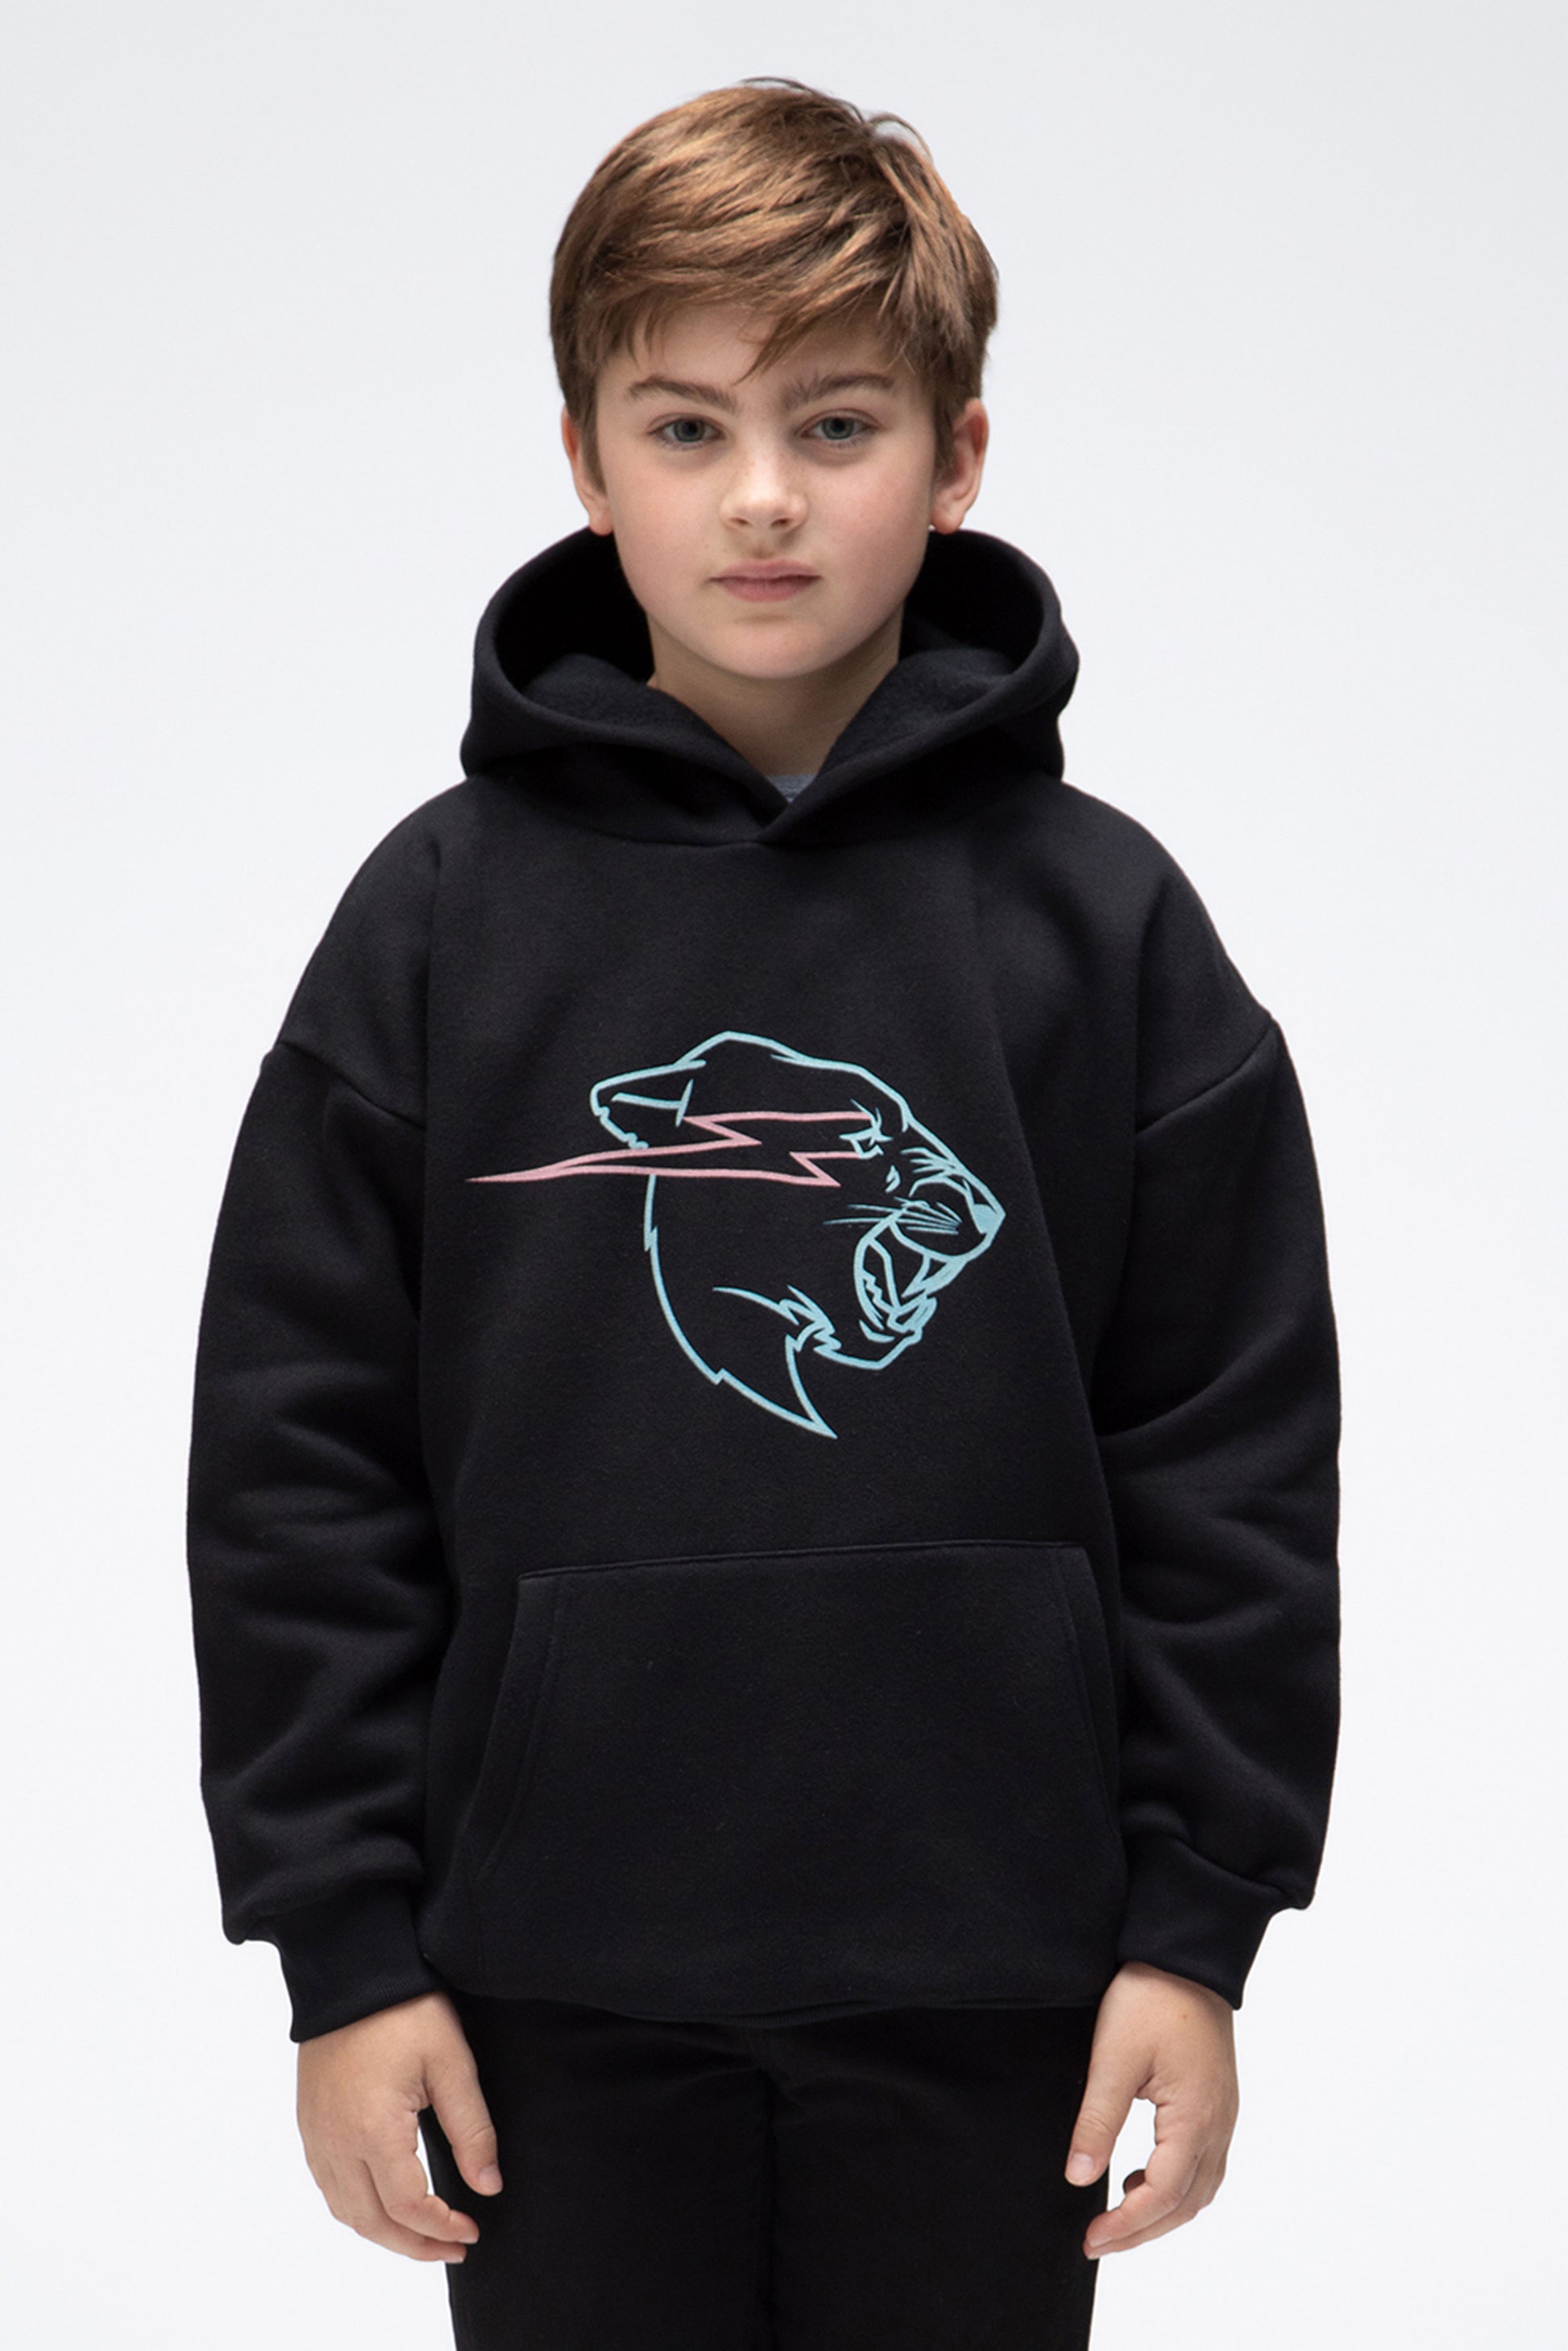 KIDS FROSTED BEAST '23 HOODIE - YELLOW